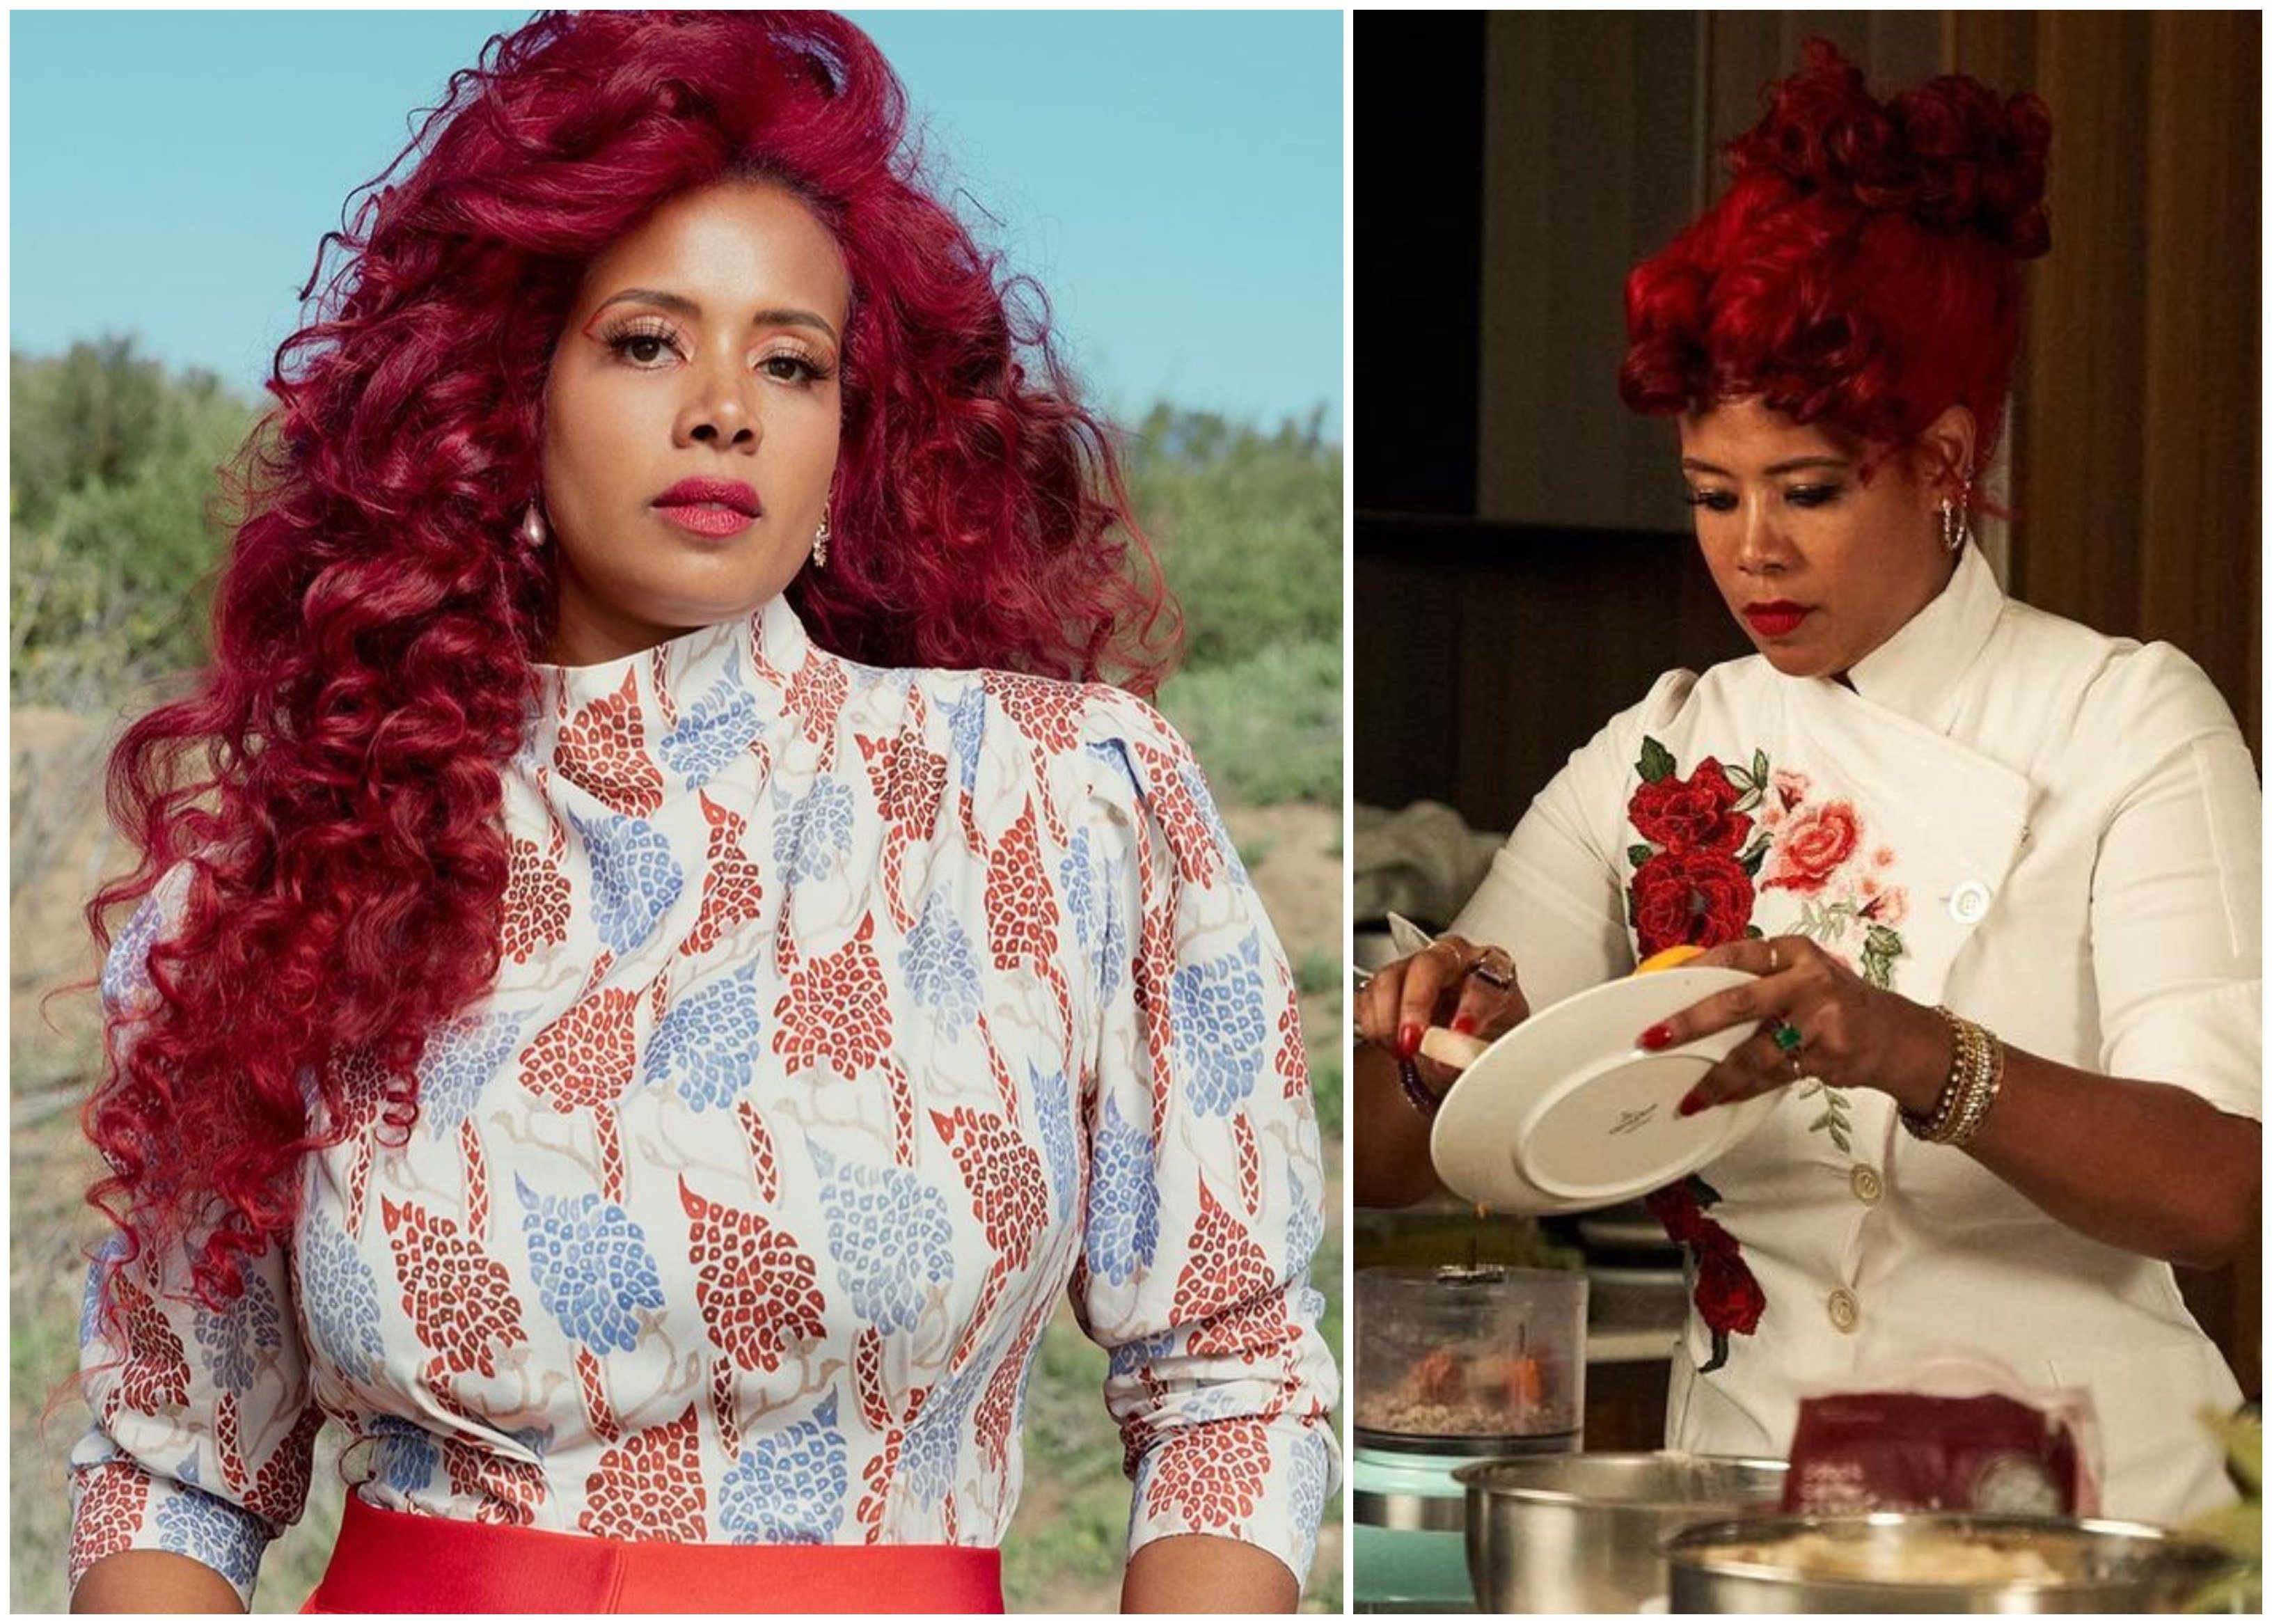 Kelis shot to fame in the late 90s as an R&B artist but has since also ventured into new career avenues. Photo: @kelis/Instagram